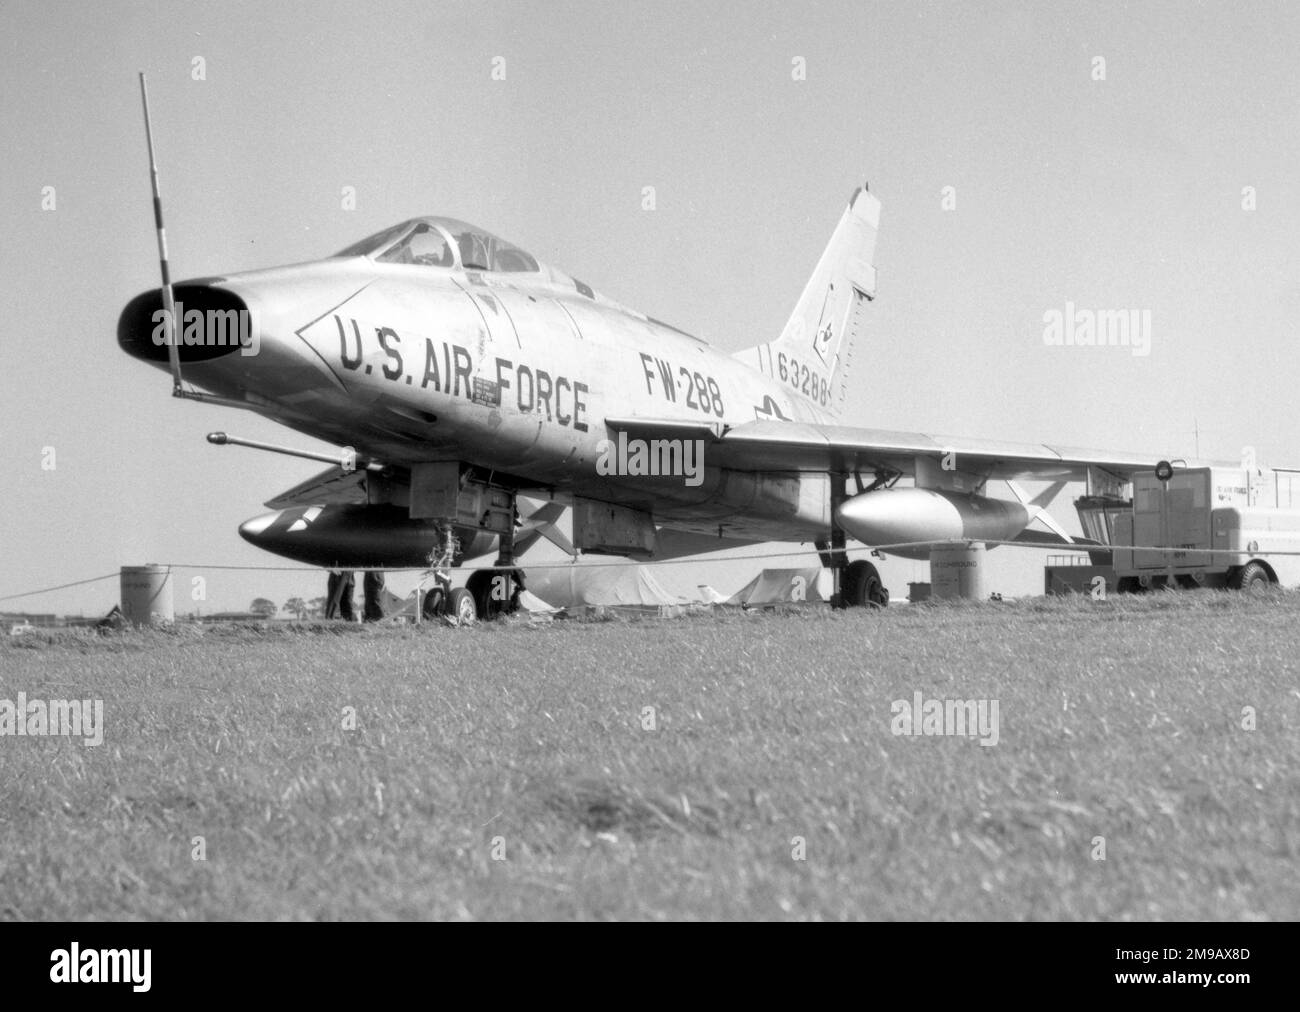 United States Air Force - North American F-100D-90-NA Super Sabre 56-3288 (msn 235-360, buzz number 'FW-288'), at RAF Waddington in September 1961. Now on display at Aerospace Museum of California, McClellan AFB, California. Stock Photo